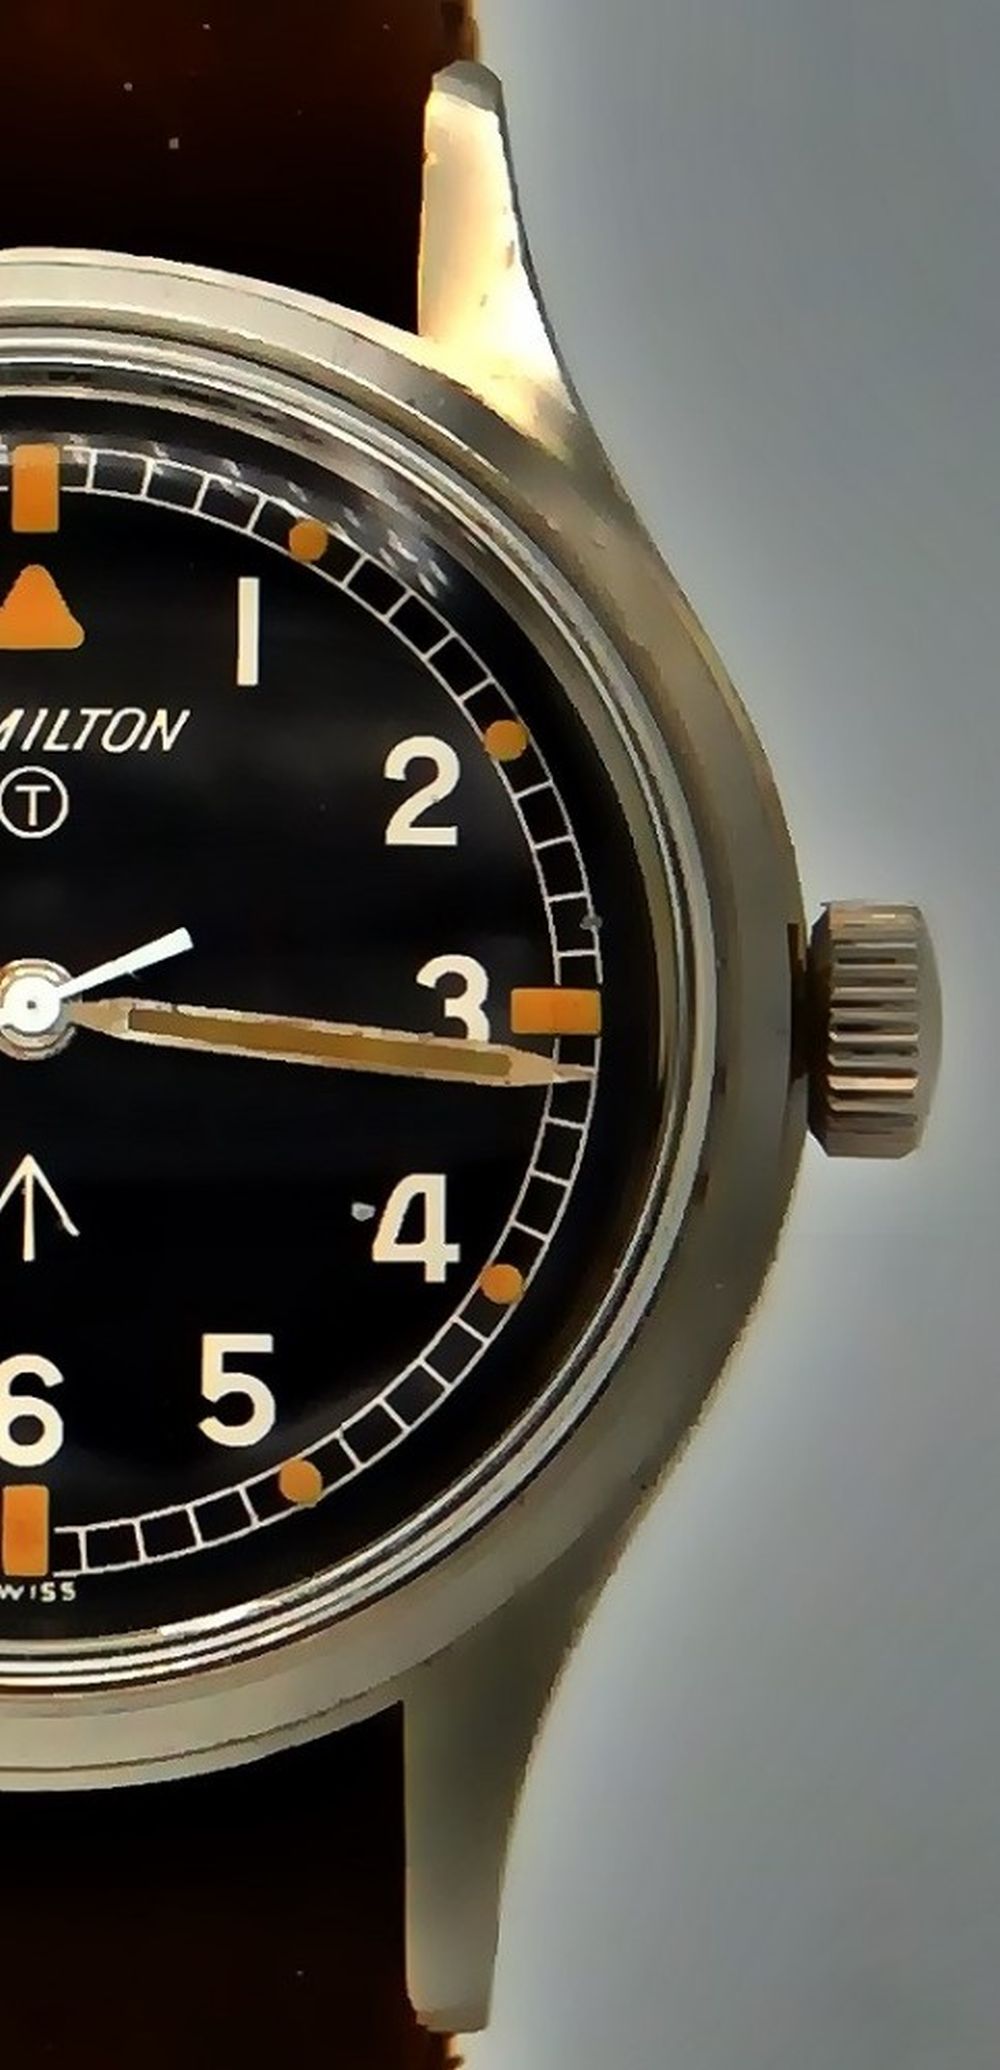 RARE HAMILTON MK11 BRITISH MILITARY ISSUE WRISTWATCH MODEL 6B 1960S. REFERENCE 6B-9101000, CAL. - Image 7 of 10